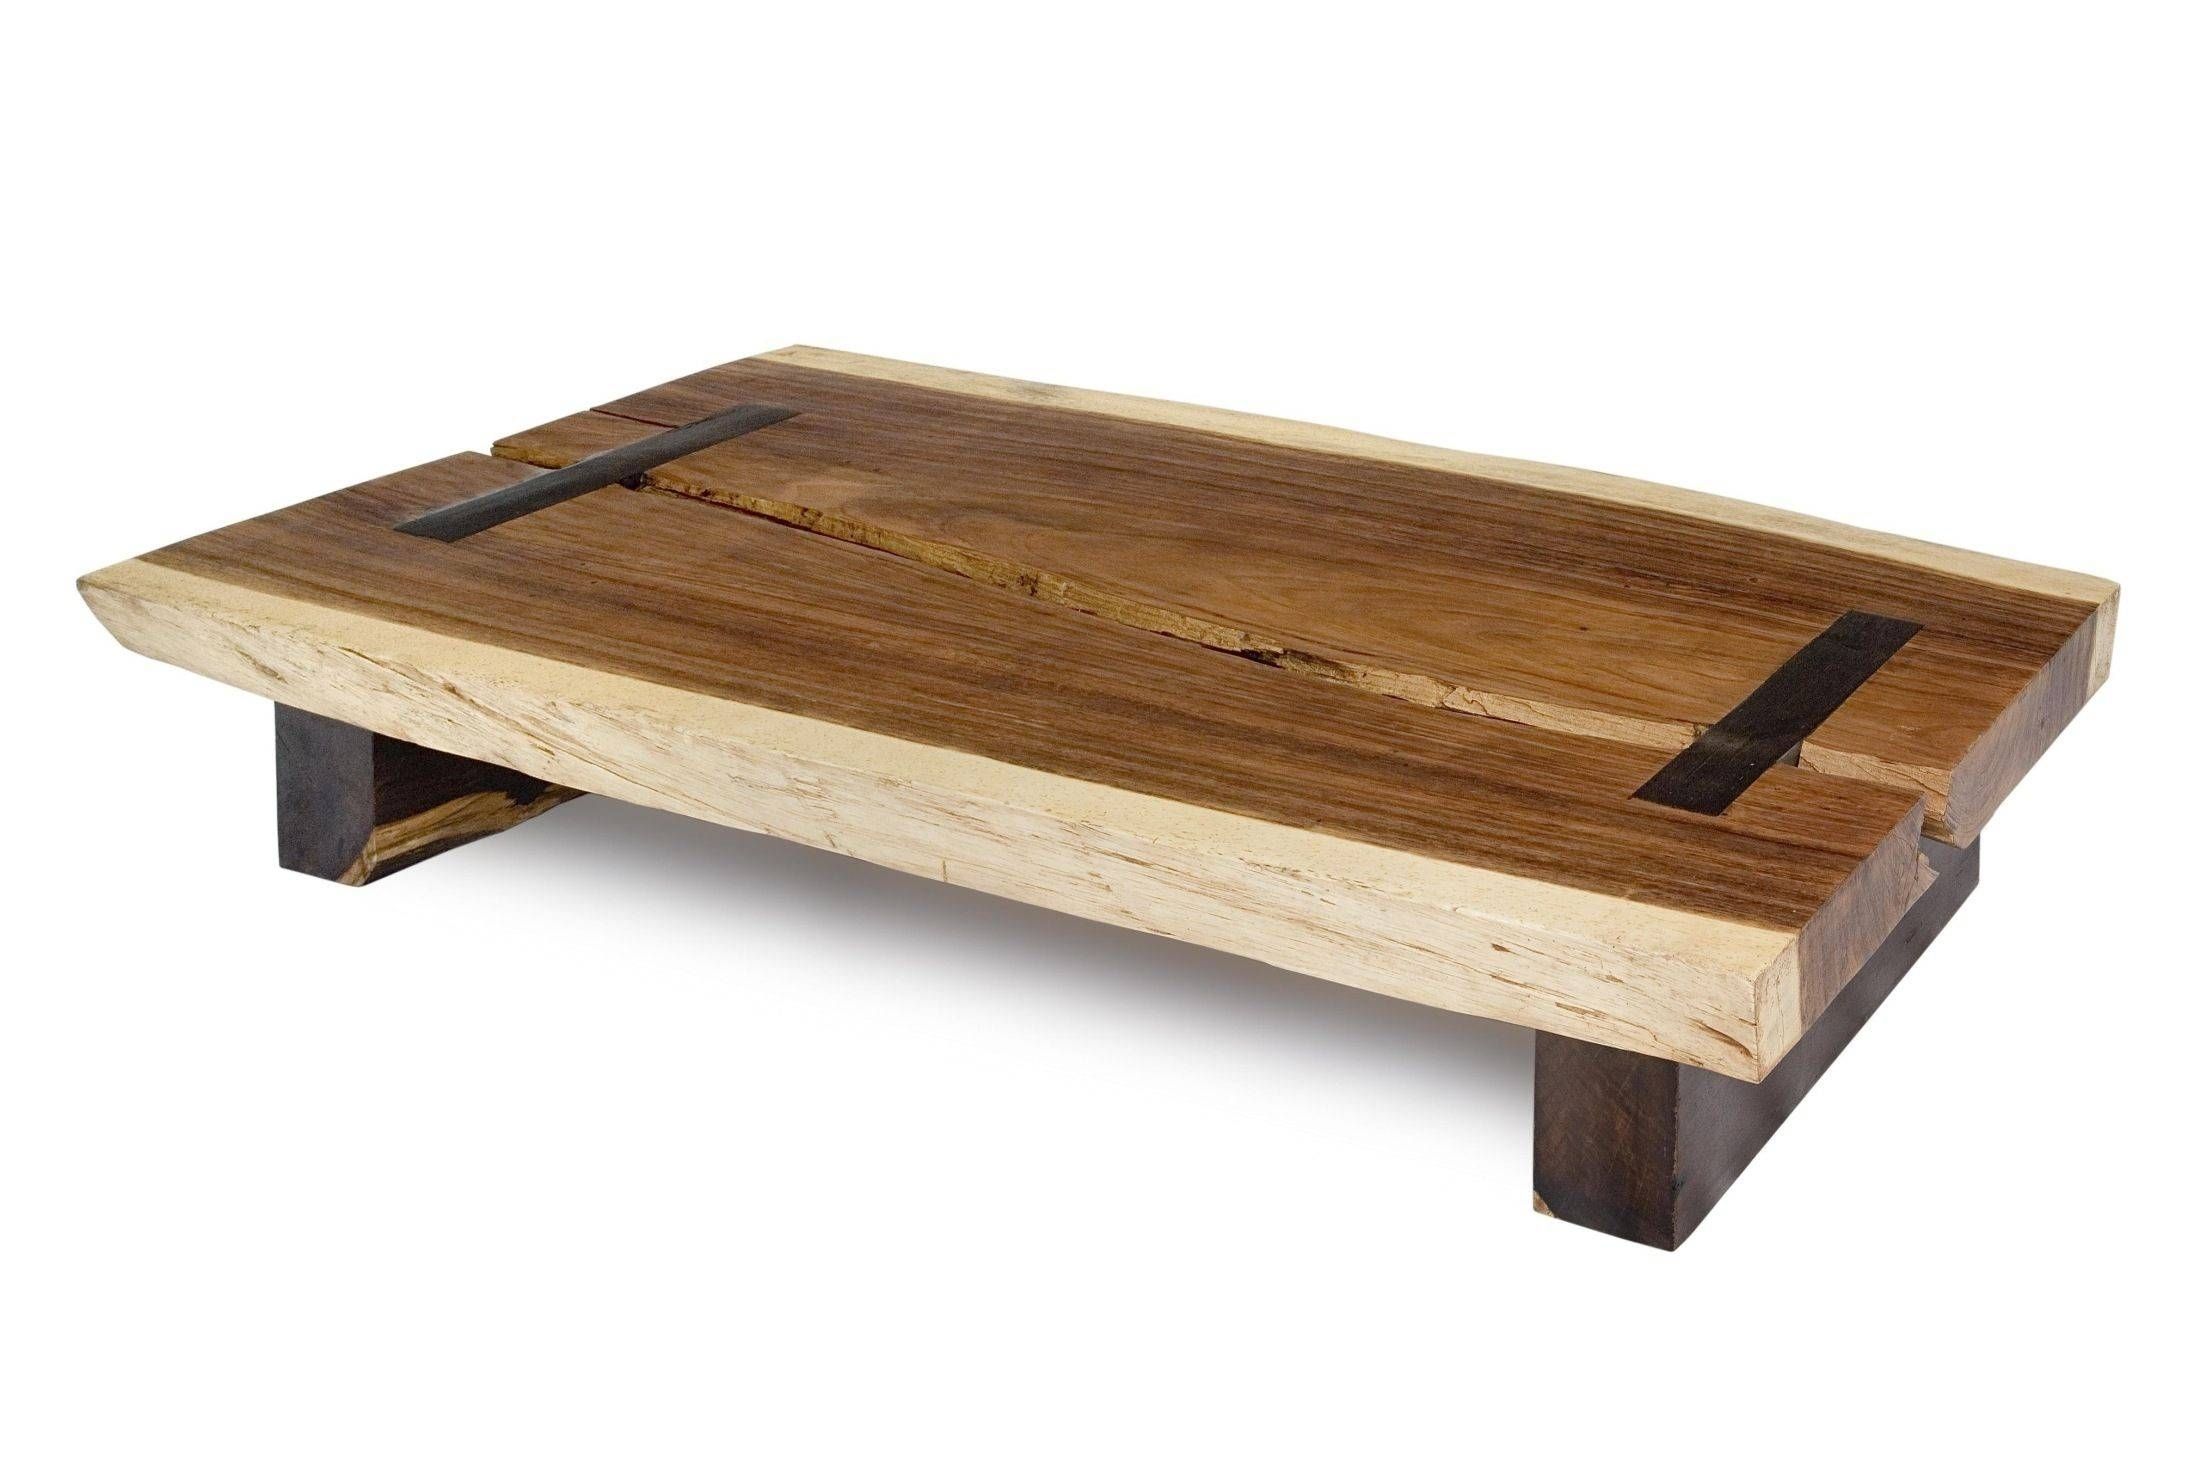 Unique Coffee Tables Ireland – Coffee Addicts For Unique Coffee Tables (View 12 of 15)